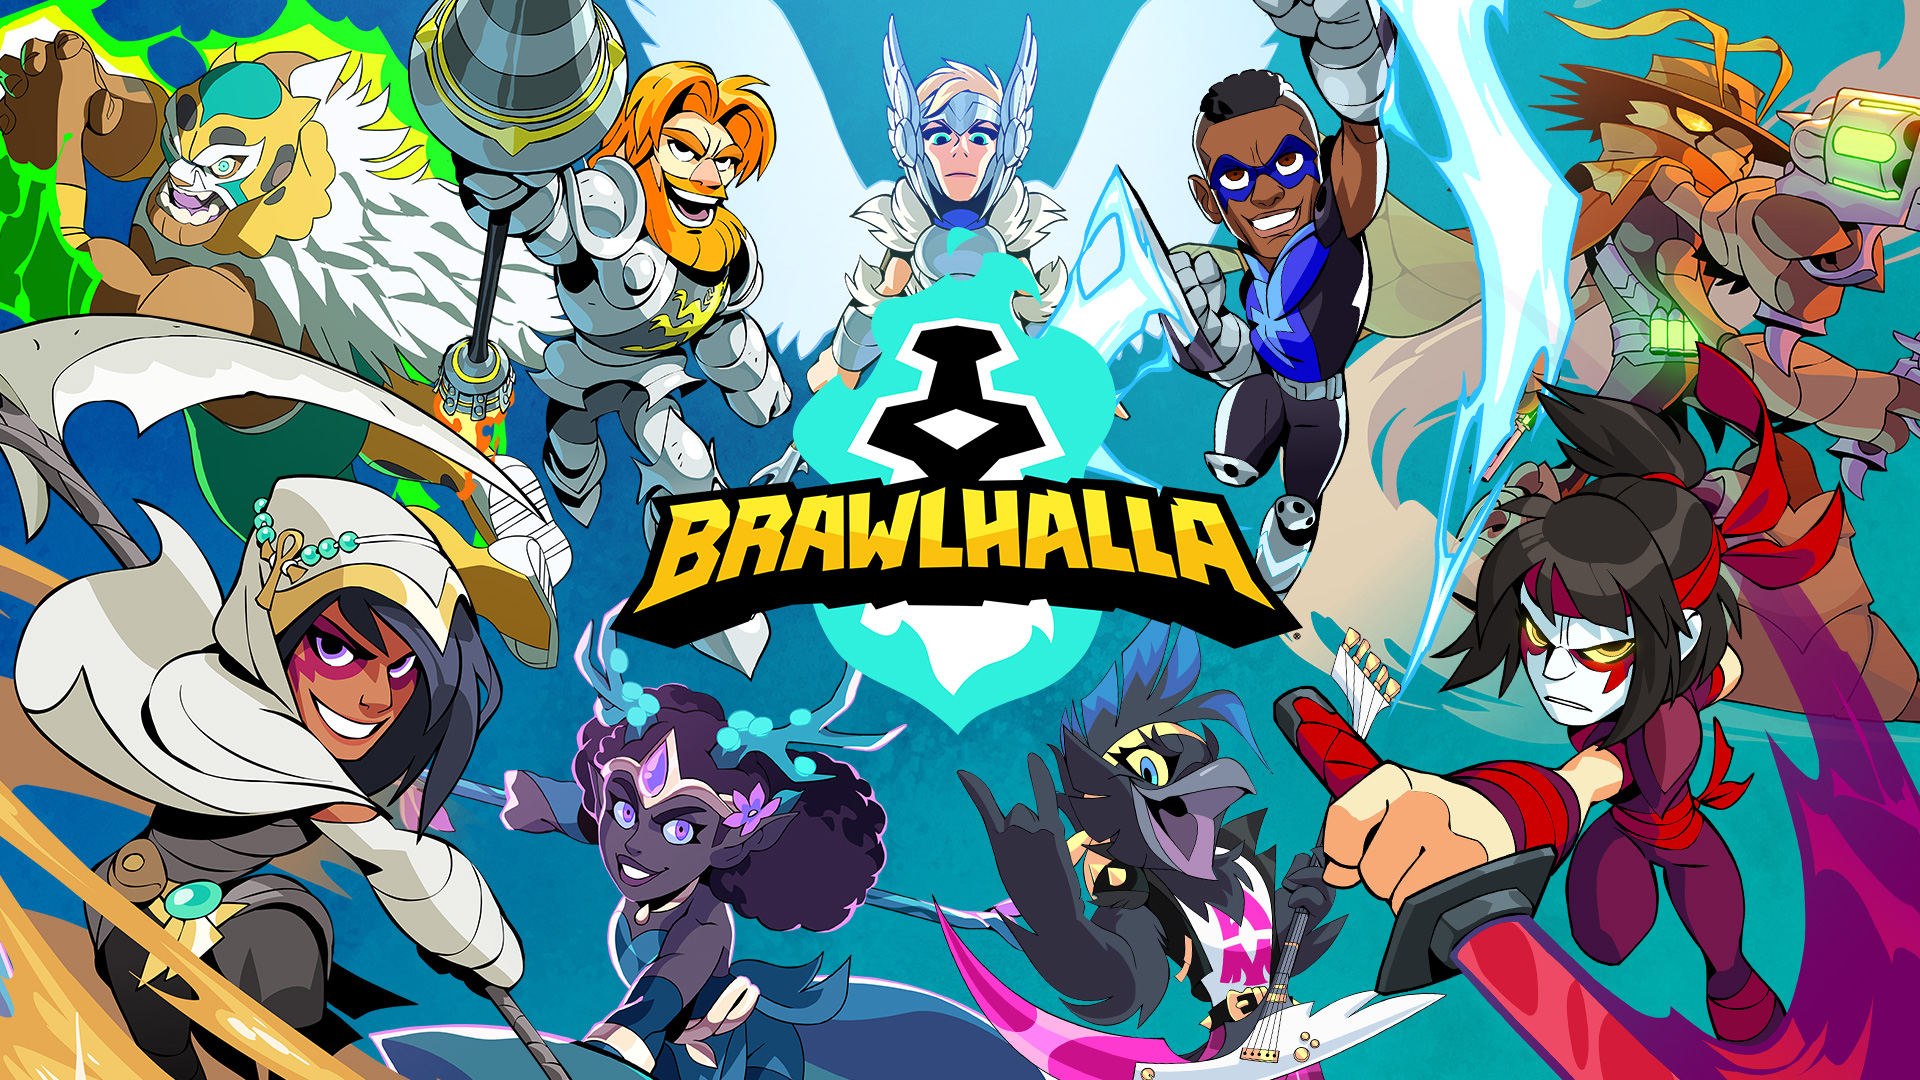 Check Out the Brawlhalla Patch 7.10 Balance Preview